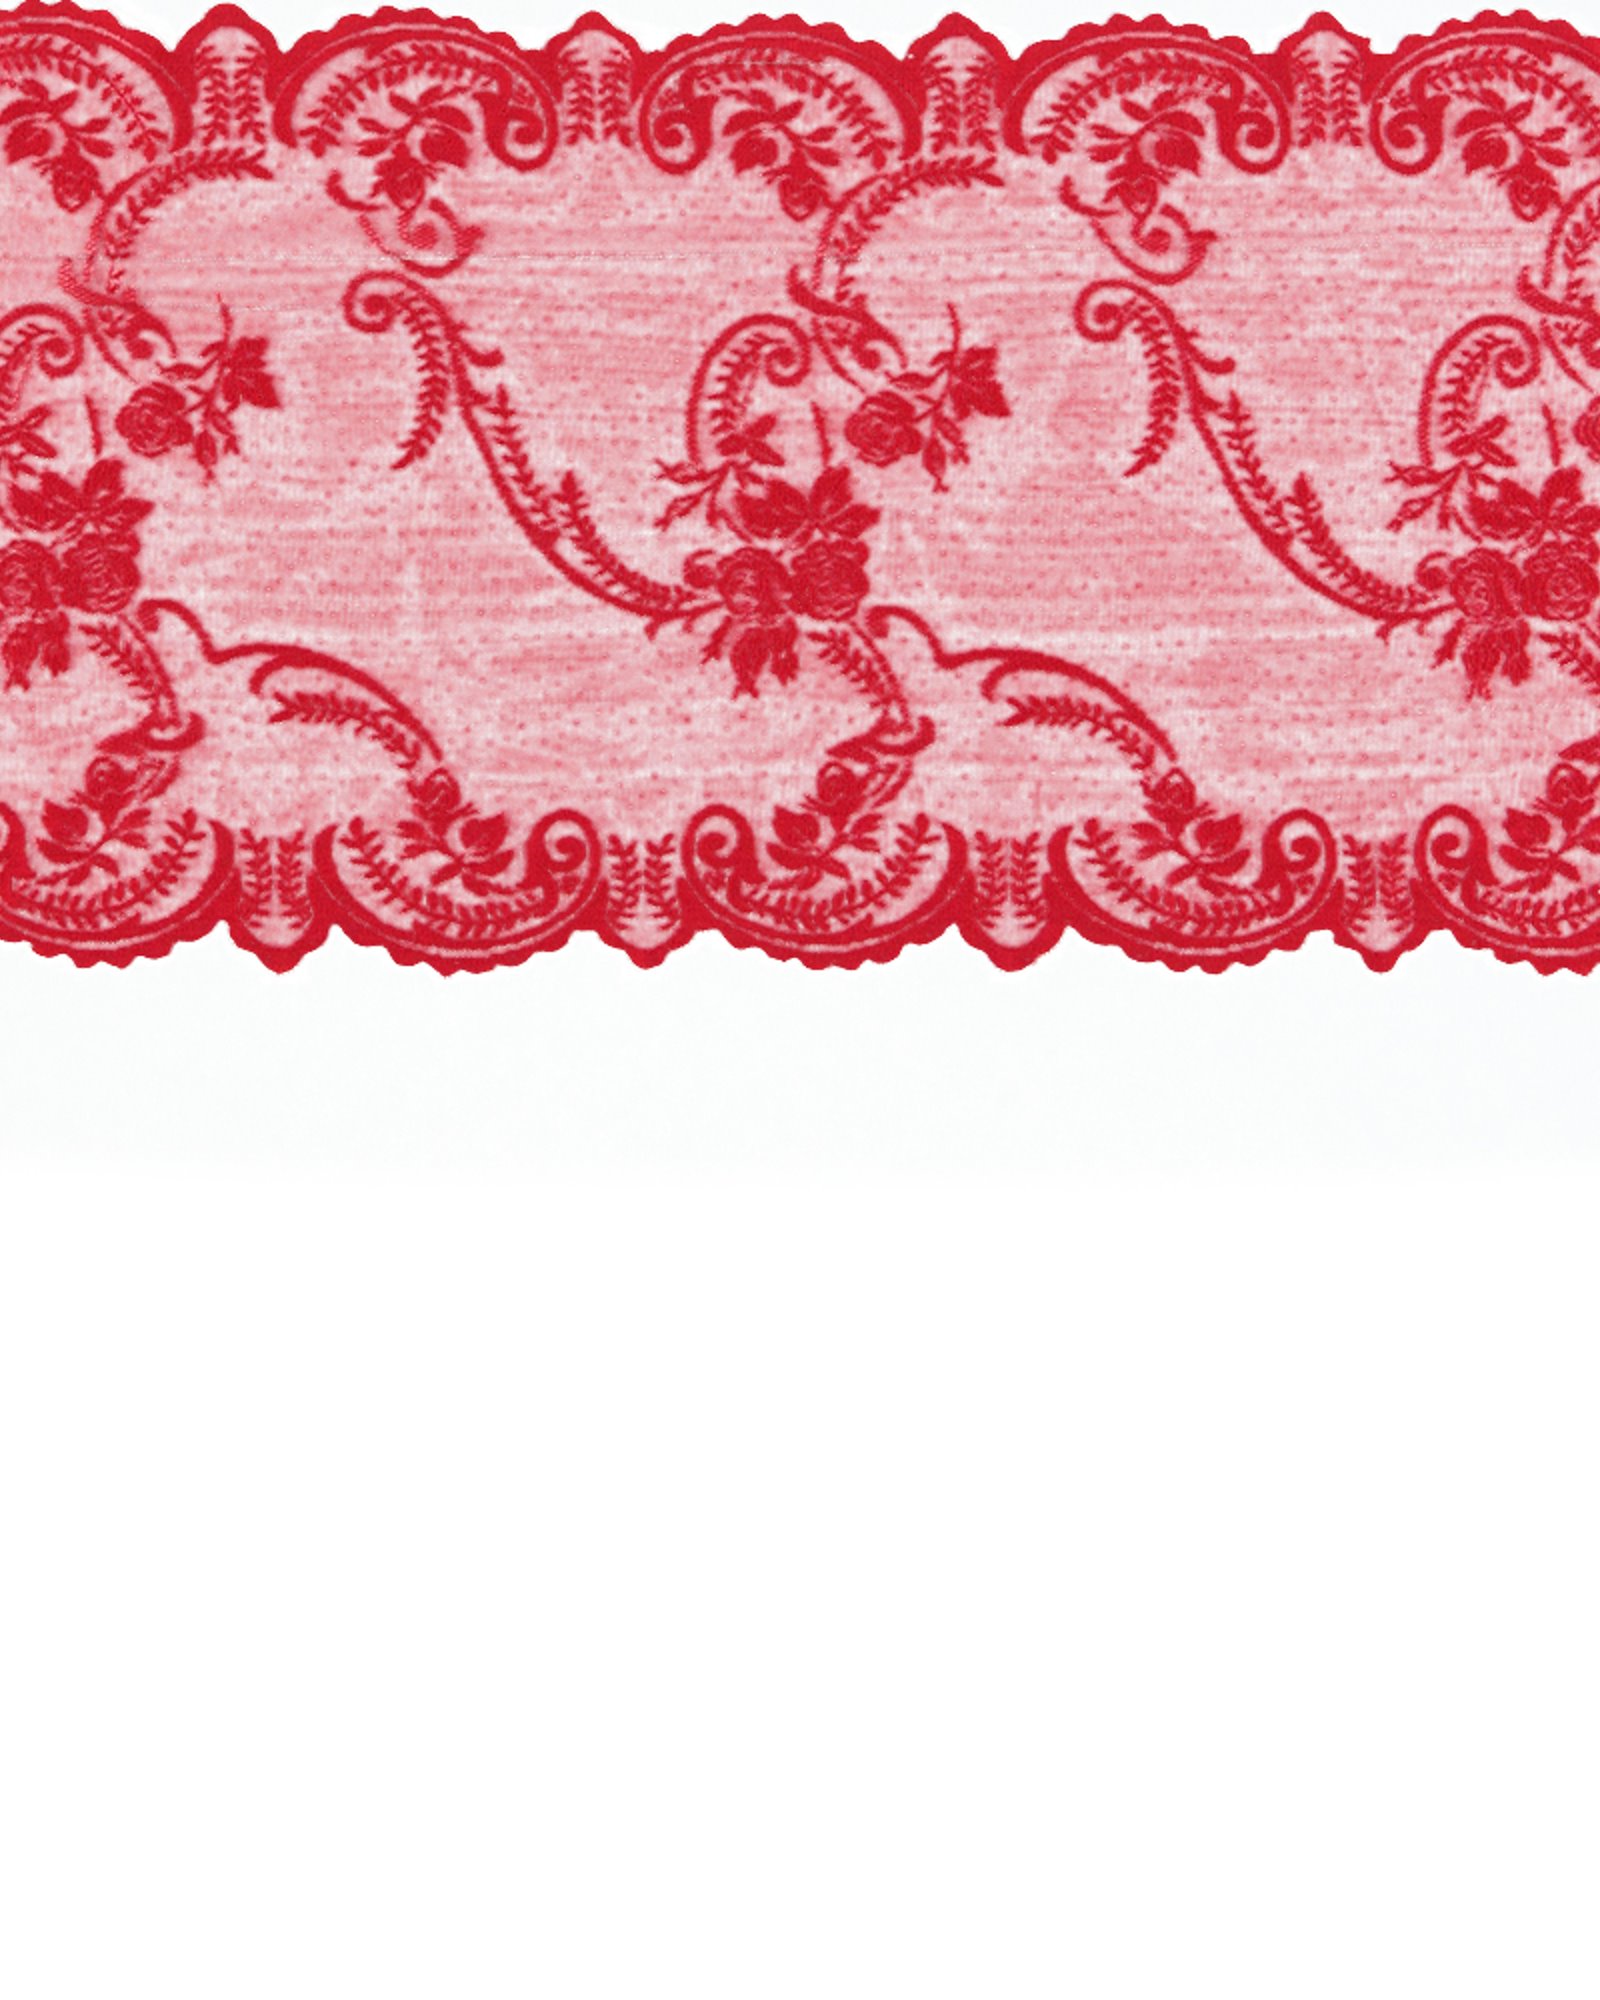 Lace mol red w rose edging 35cm 815667_pack_lp